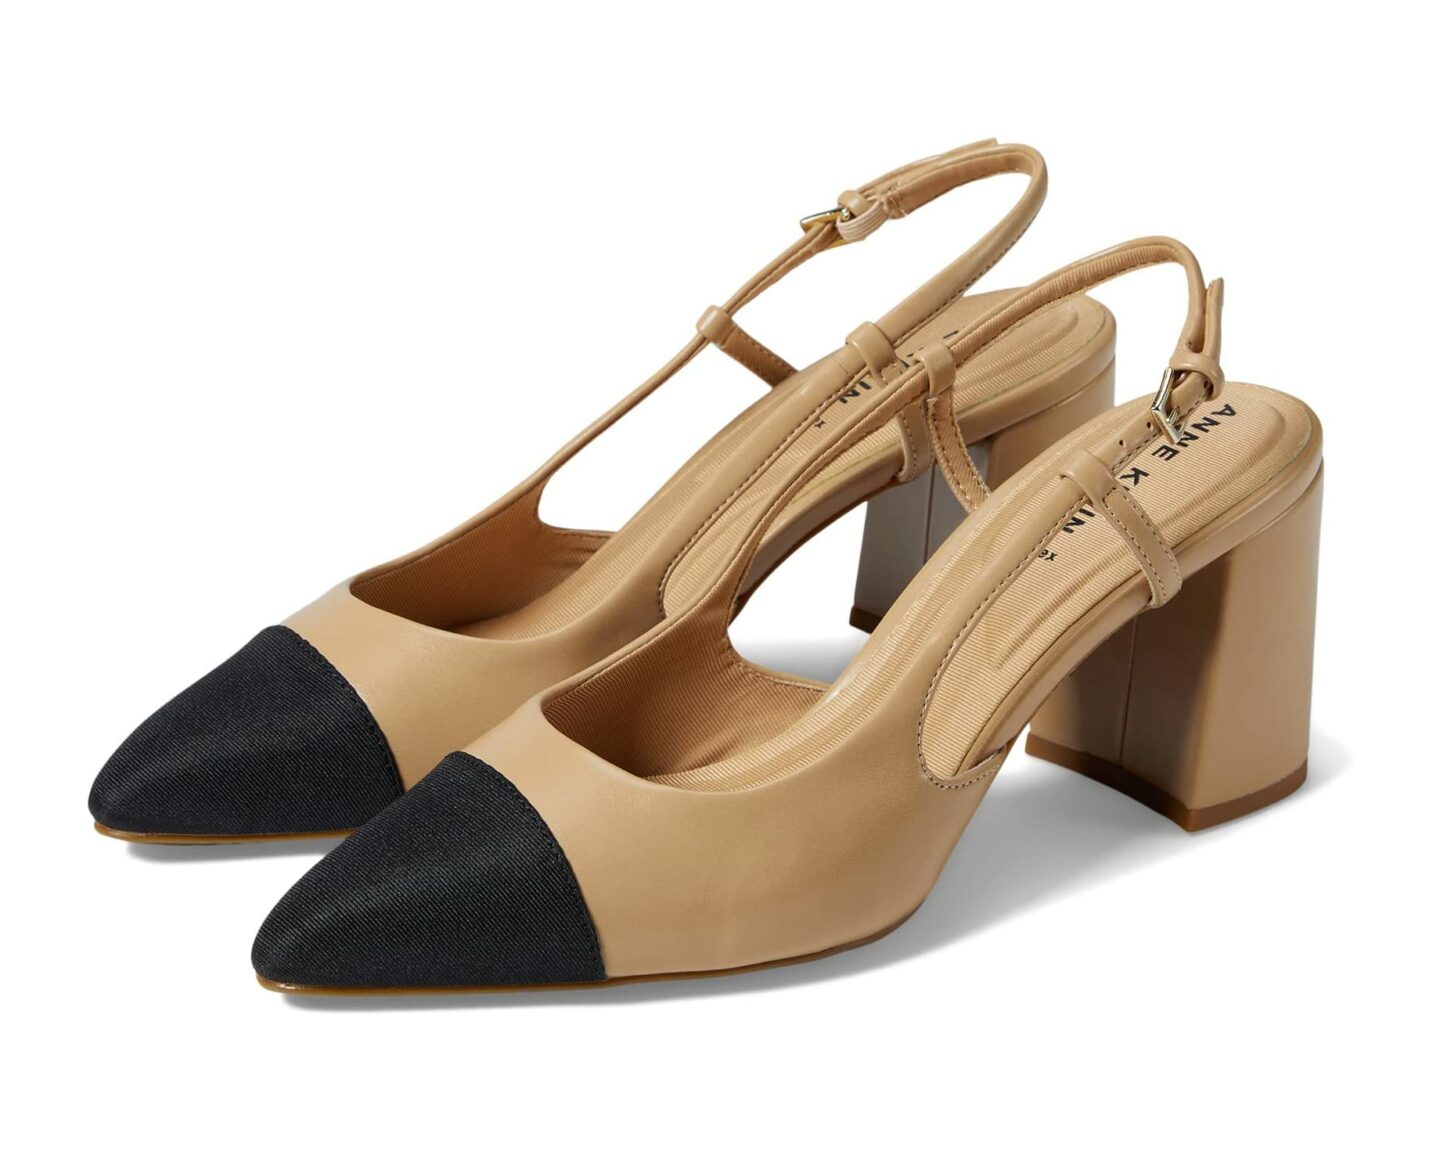 Anne Klein Brinlee pointed toe pumps in nude and black leather.